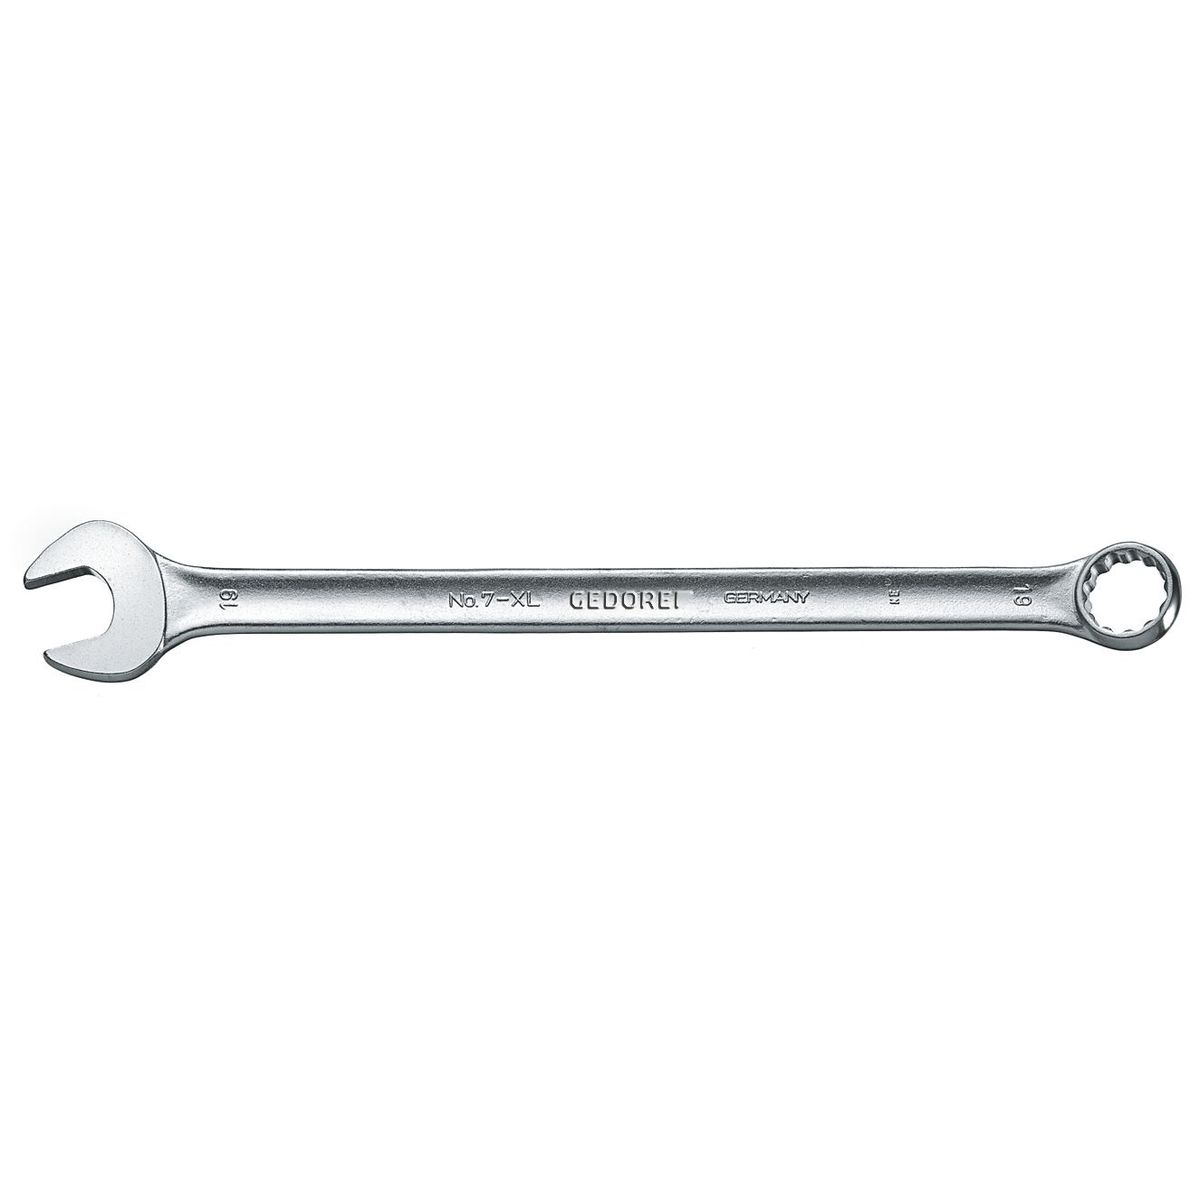 Combination spanner, extra long 9mm No.7 XL 9 Gedore